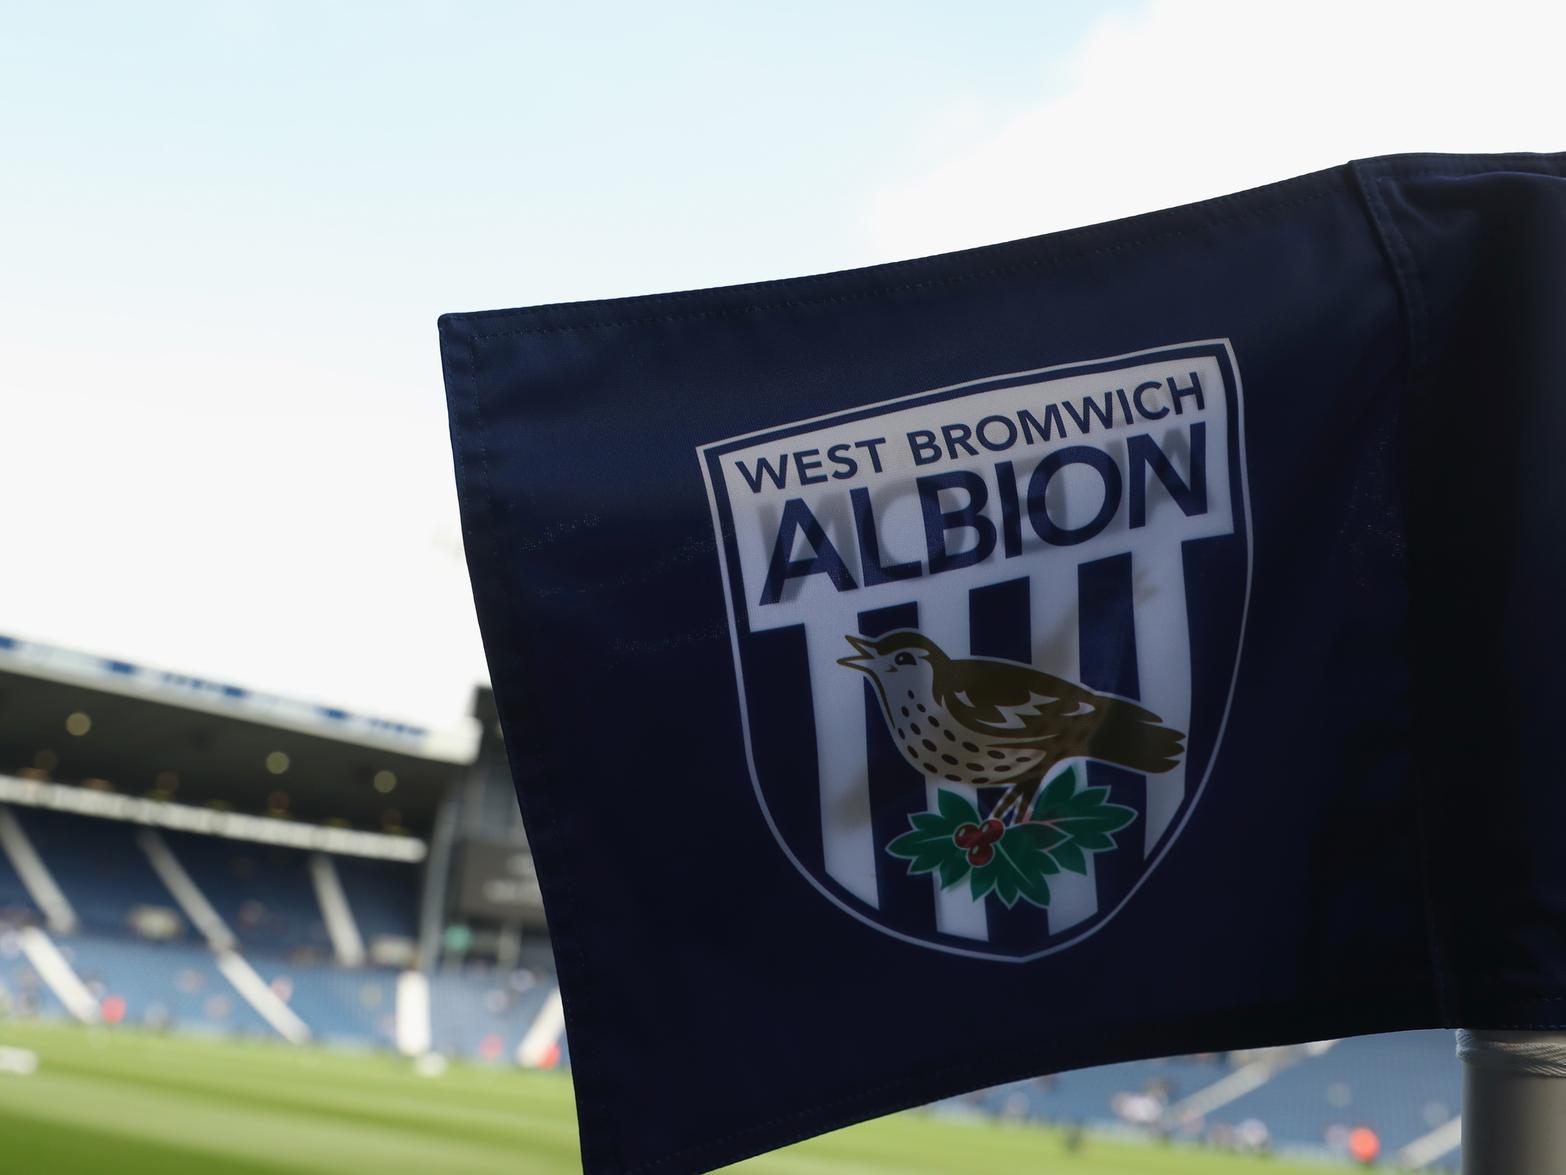 Ex-West Brom midfielder Nigel Quashie has claimed that the Baggies will need to sign "at least eight" new players to stand a chance of surviving in the Premier League next season, should they earn promotion. (Football League World)